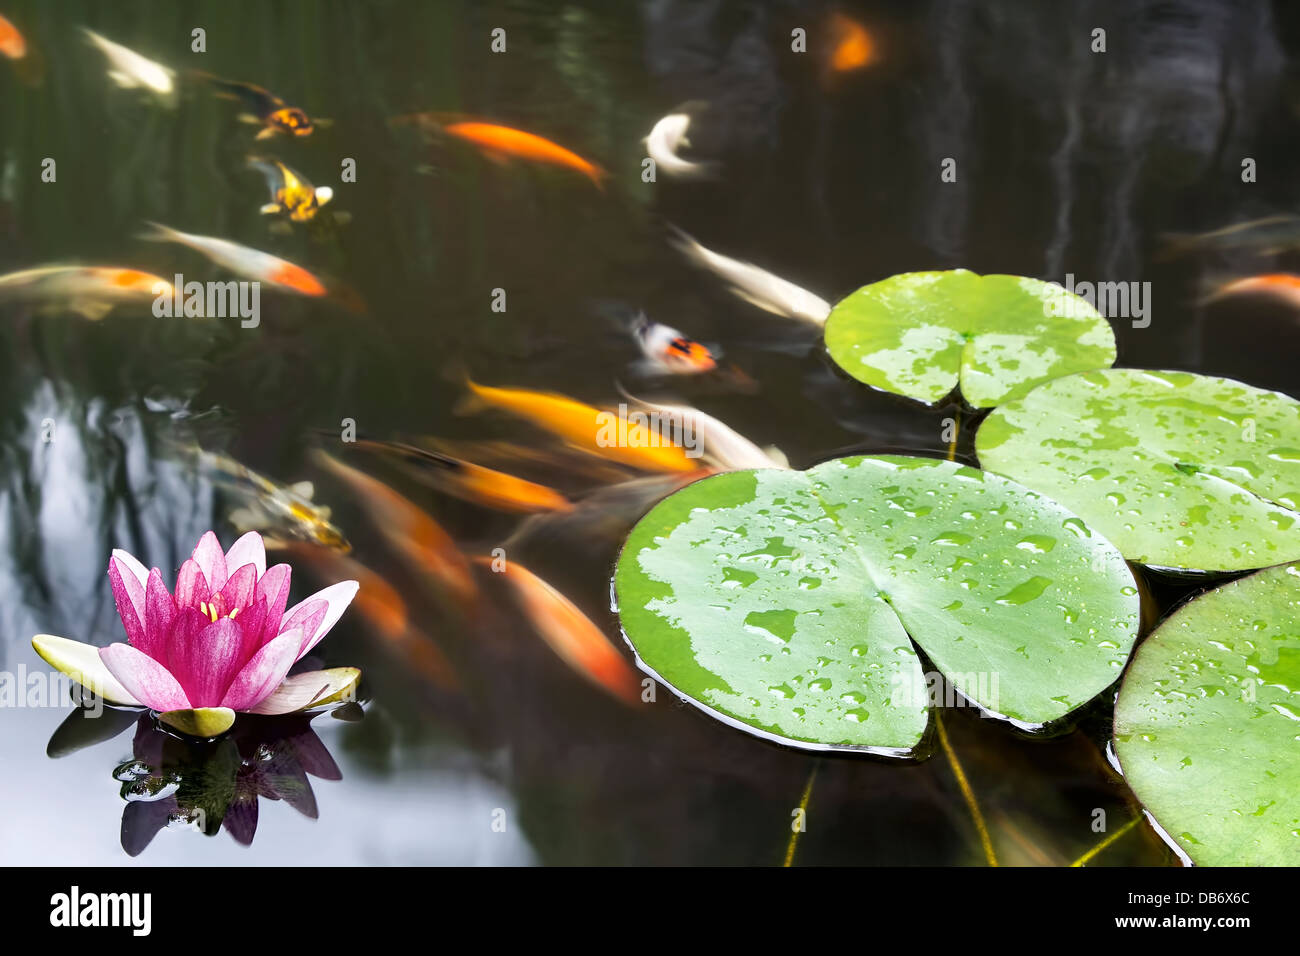 Lily Pad Leaf and Pink Flower Floating in Koi Fish Pond Stock Photo